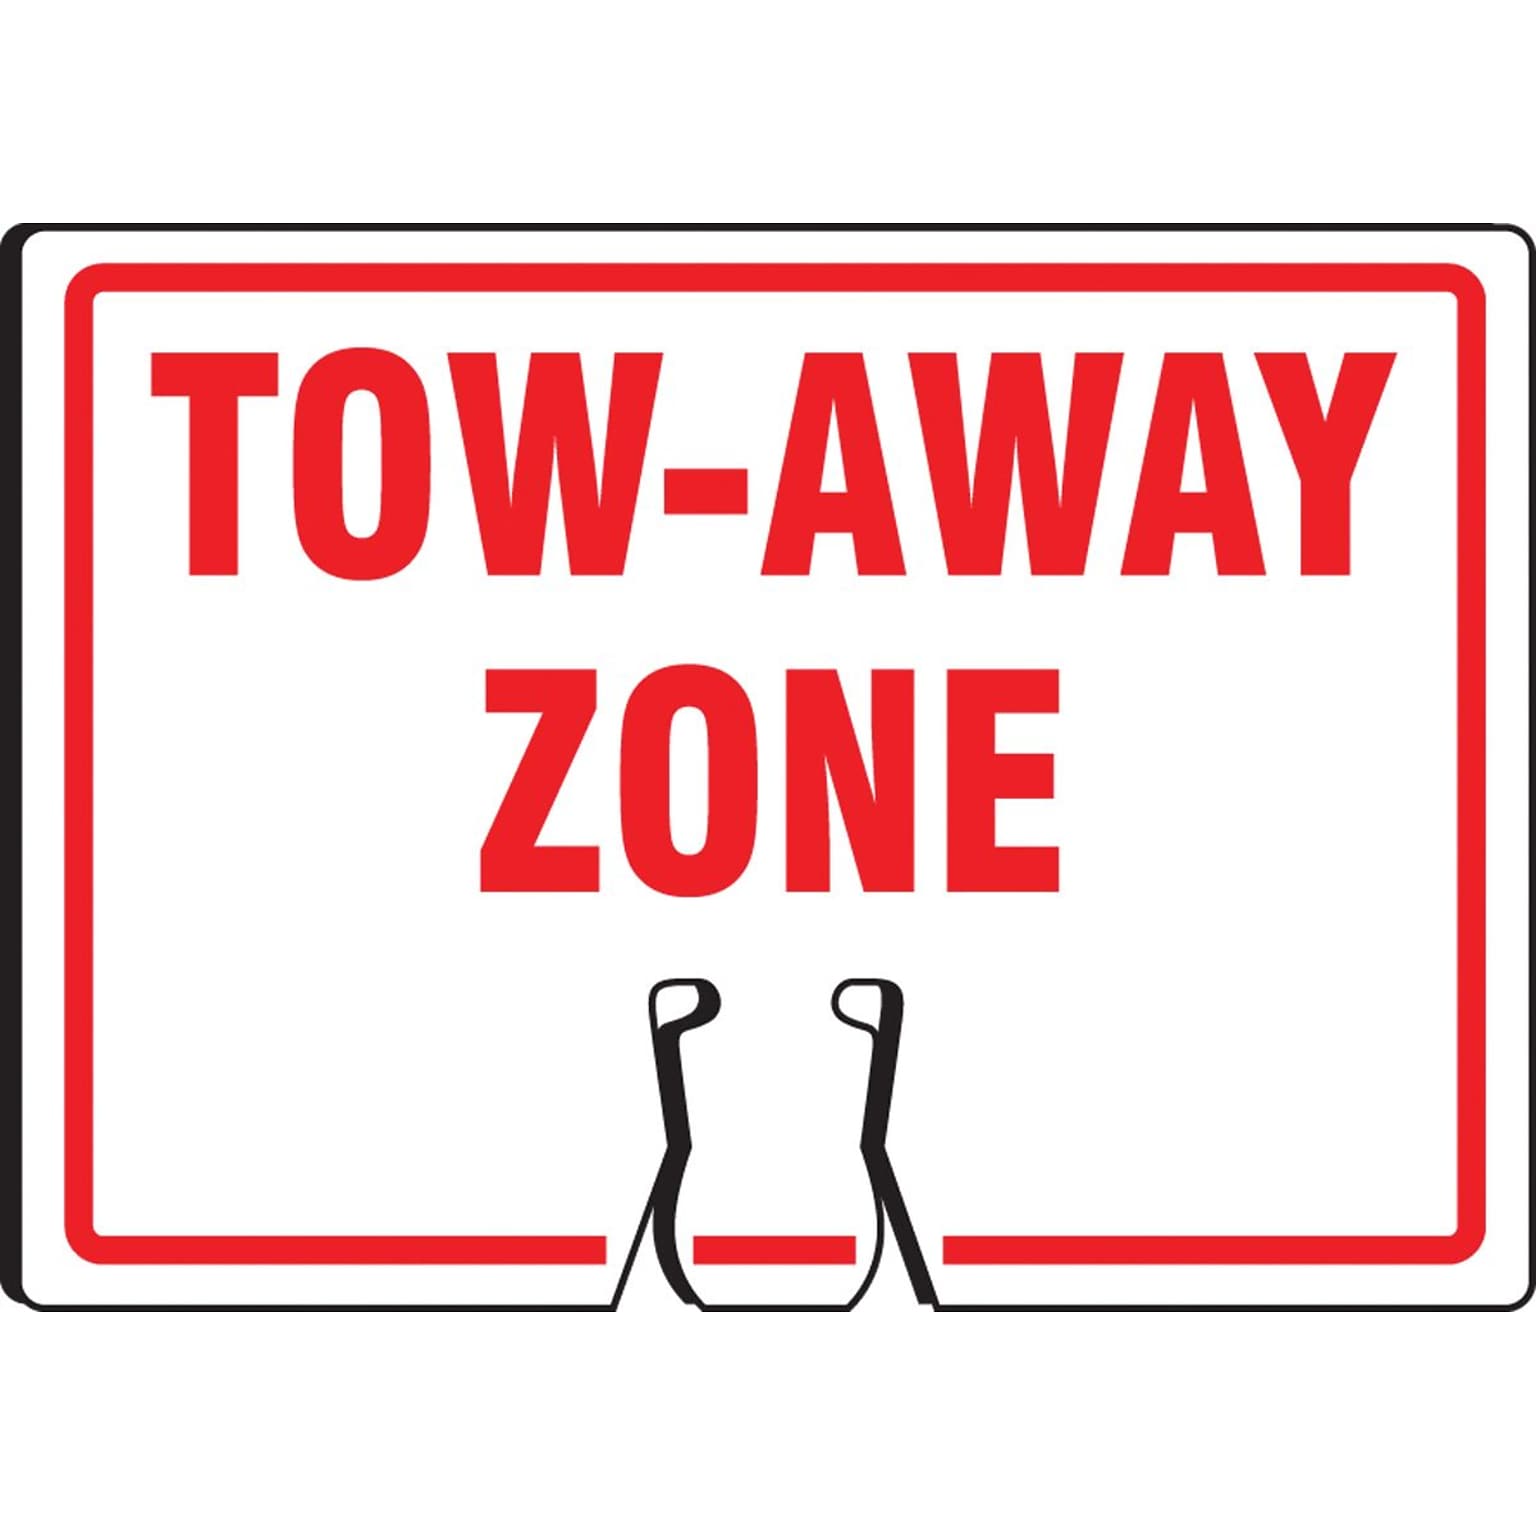 Accuform Traffic Cone Top Warning Sign, TOW-AWAY ZONE, 10 x 14, Plastic (FBC739)